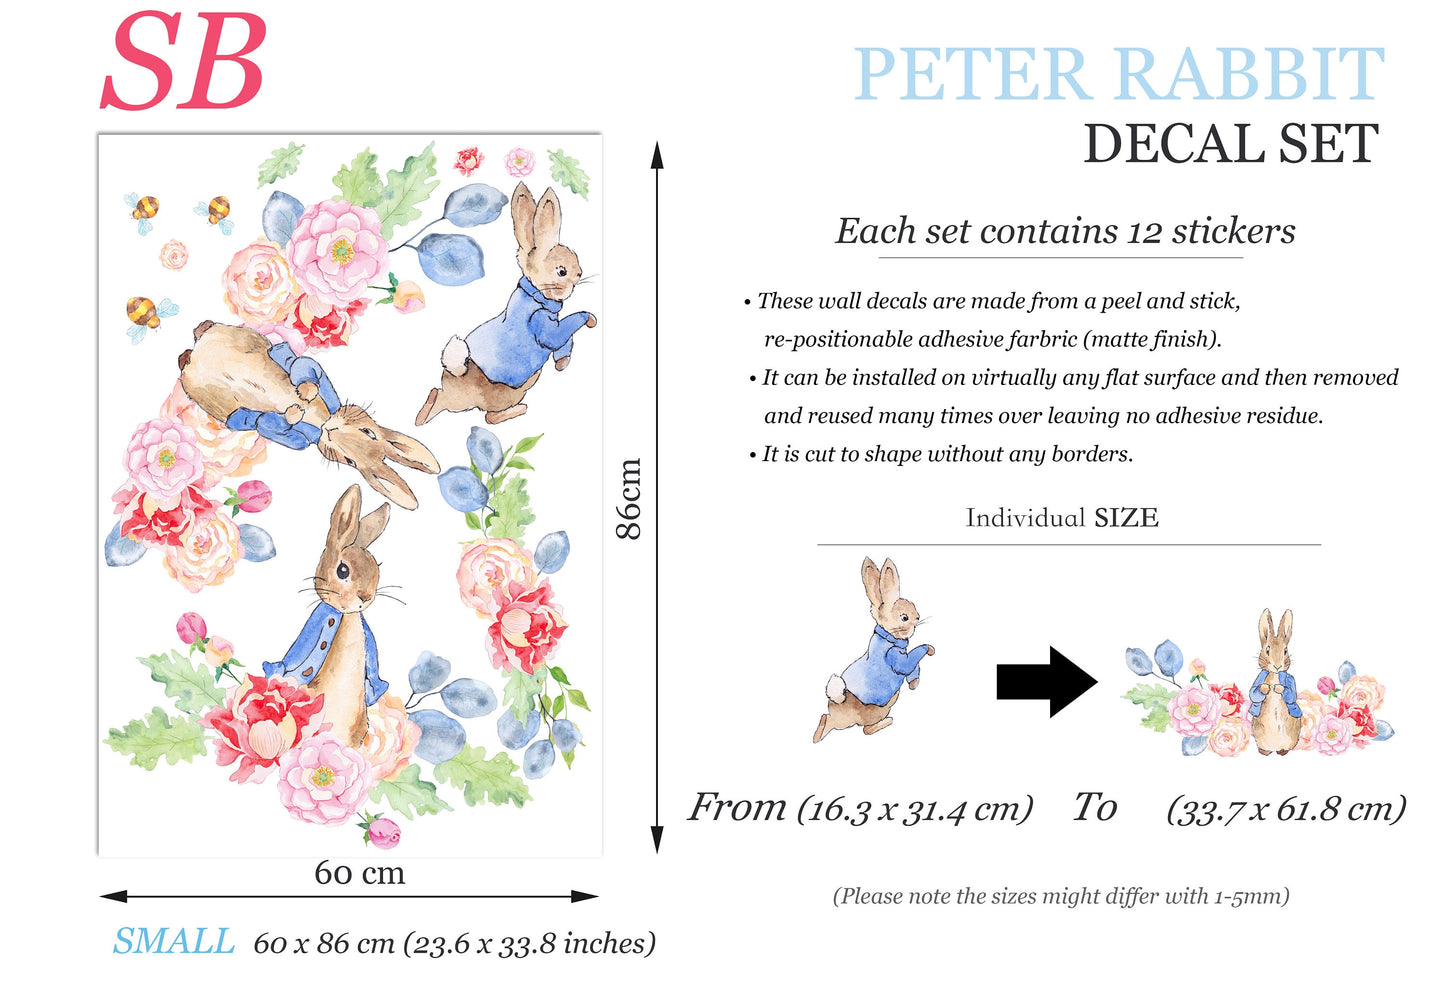 Peter Rabbit Family: Cartoon Wall Decal in a Floral Wonderland - BR421